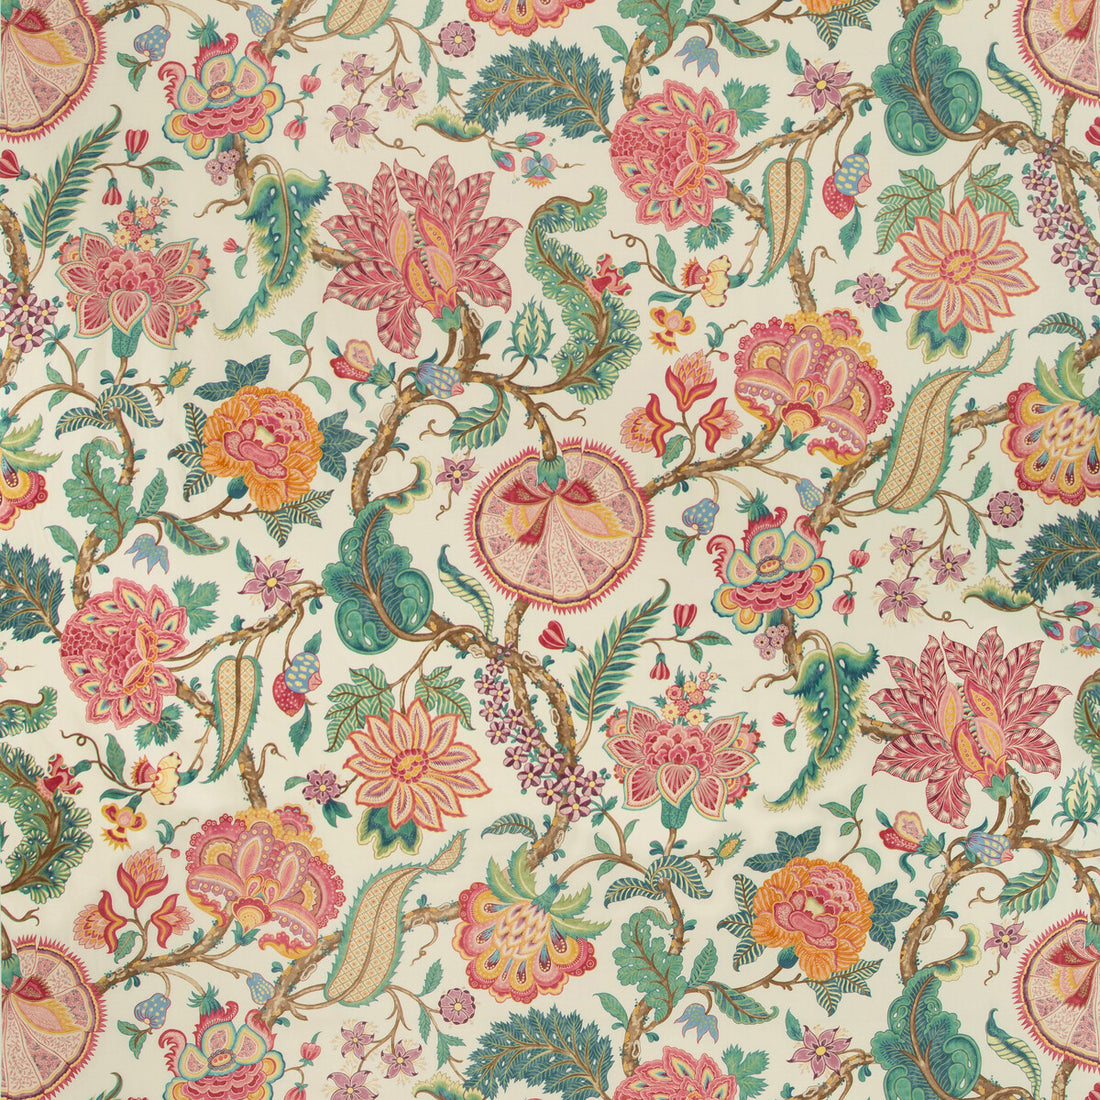 Saranda Print fabric in jewel color - pattern 8019128.347.0 - by Brunschwig &amp; Fils in the Folio Francais collection